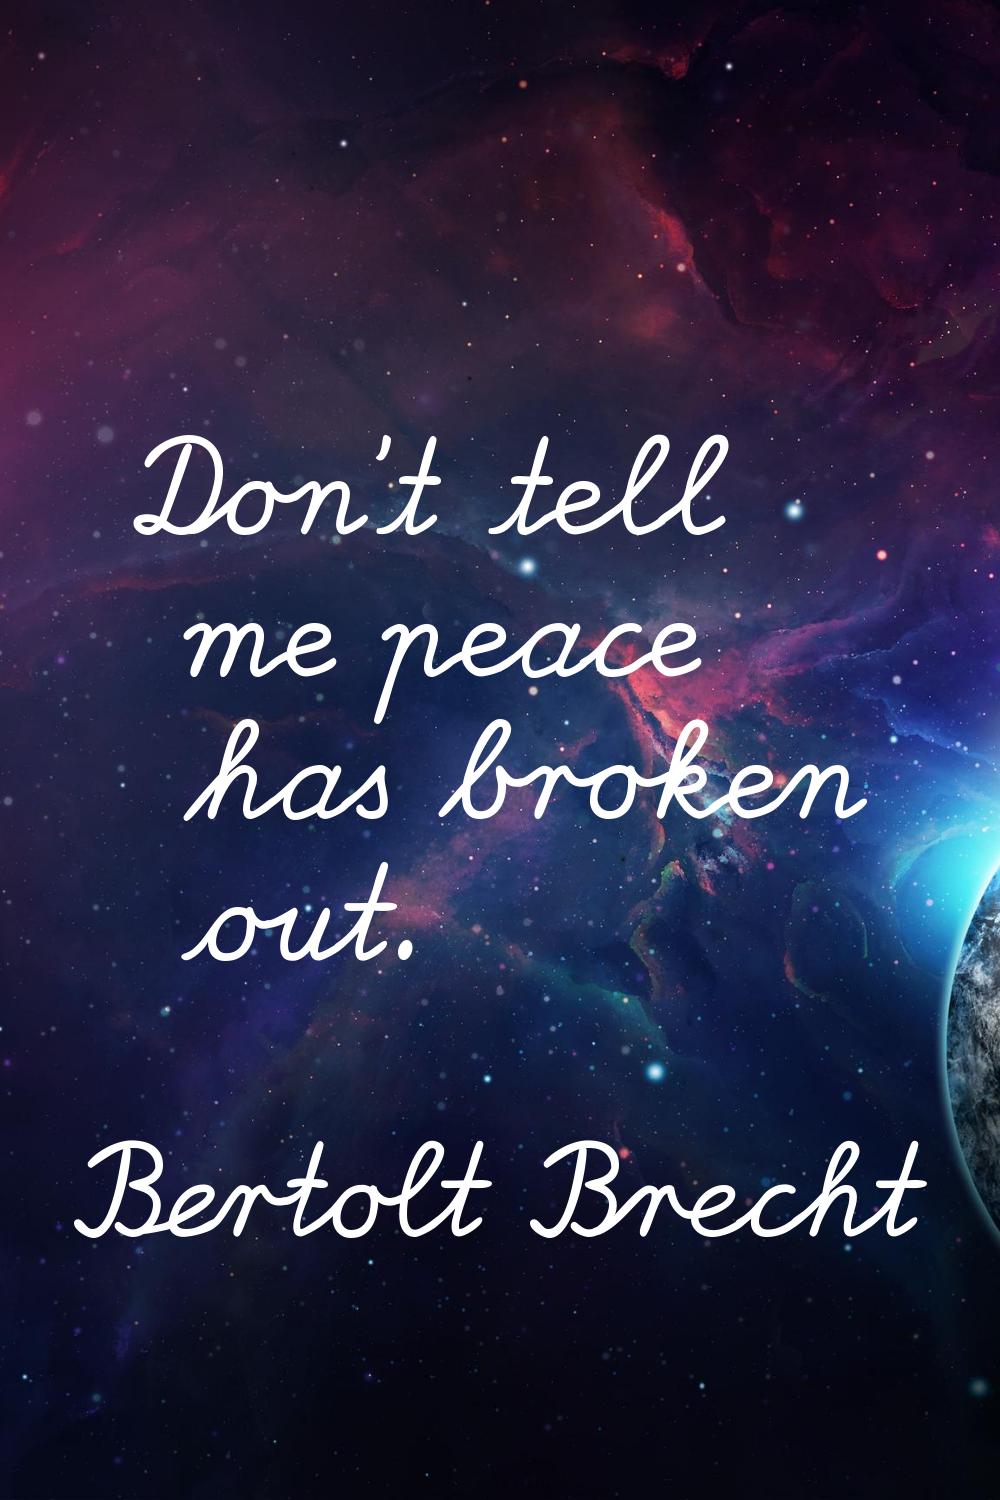 Don't tell me peace has broken out.